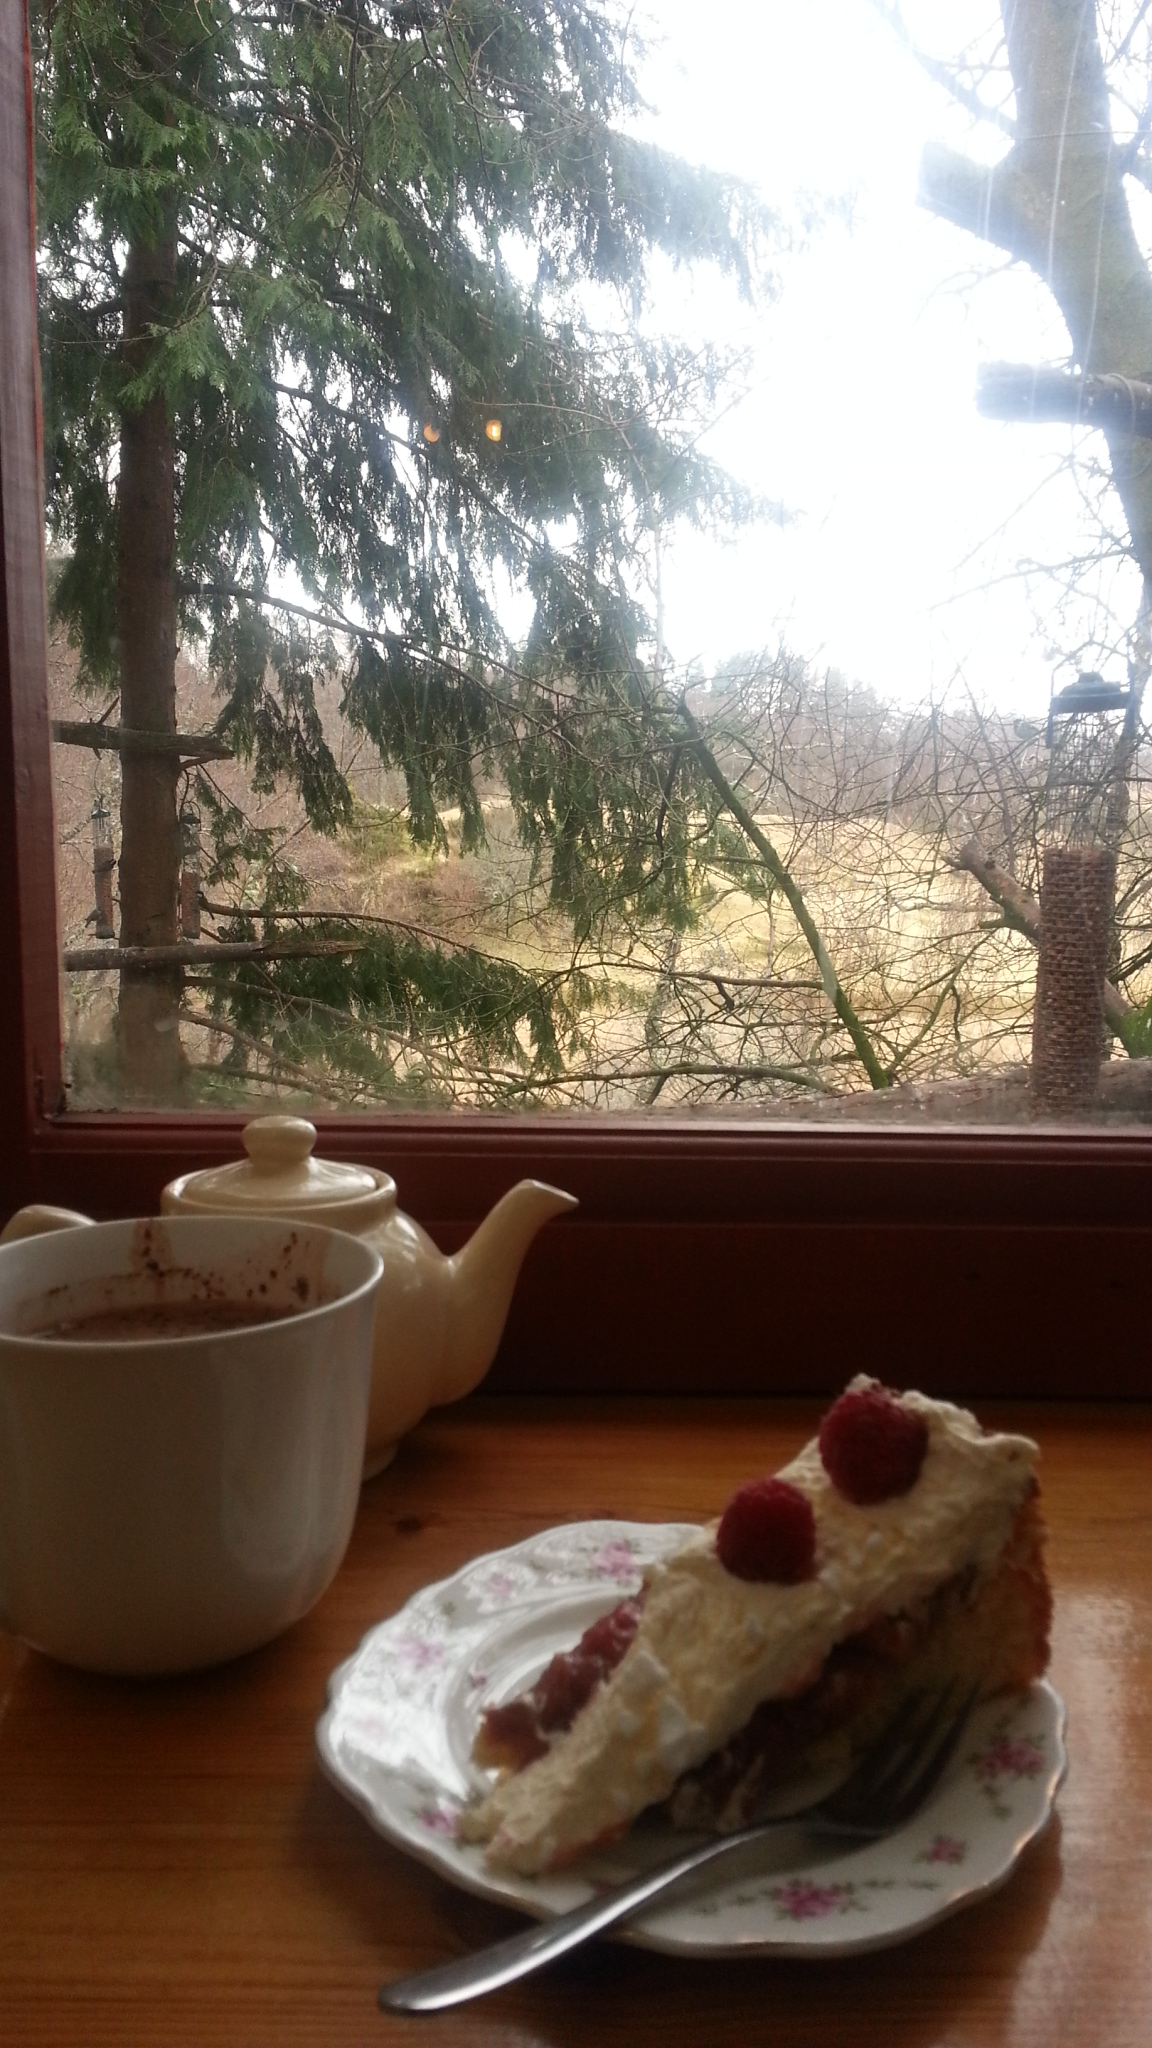 Cake with a view at The Potting Shed